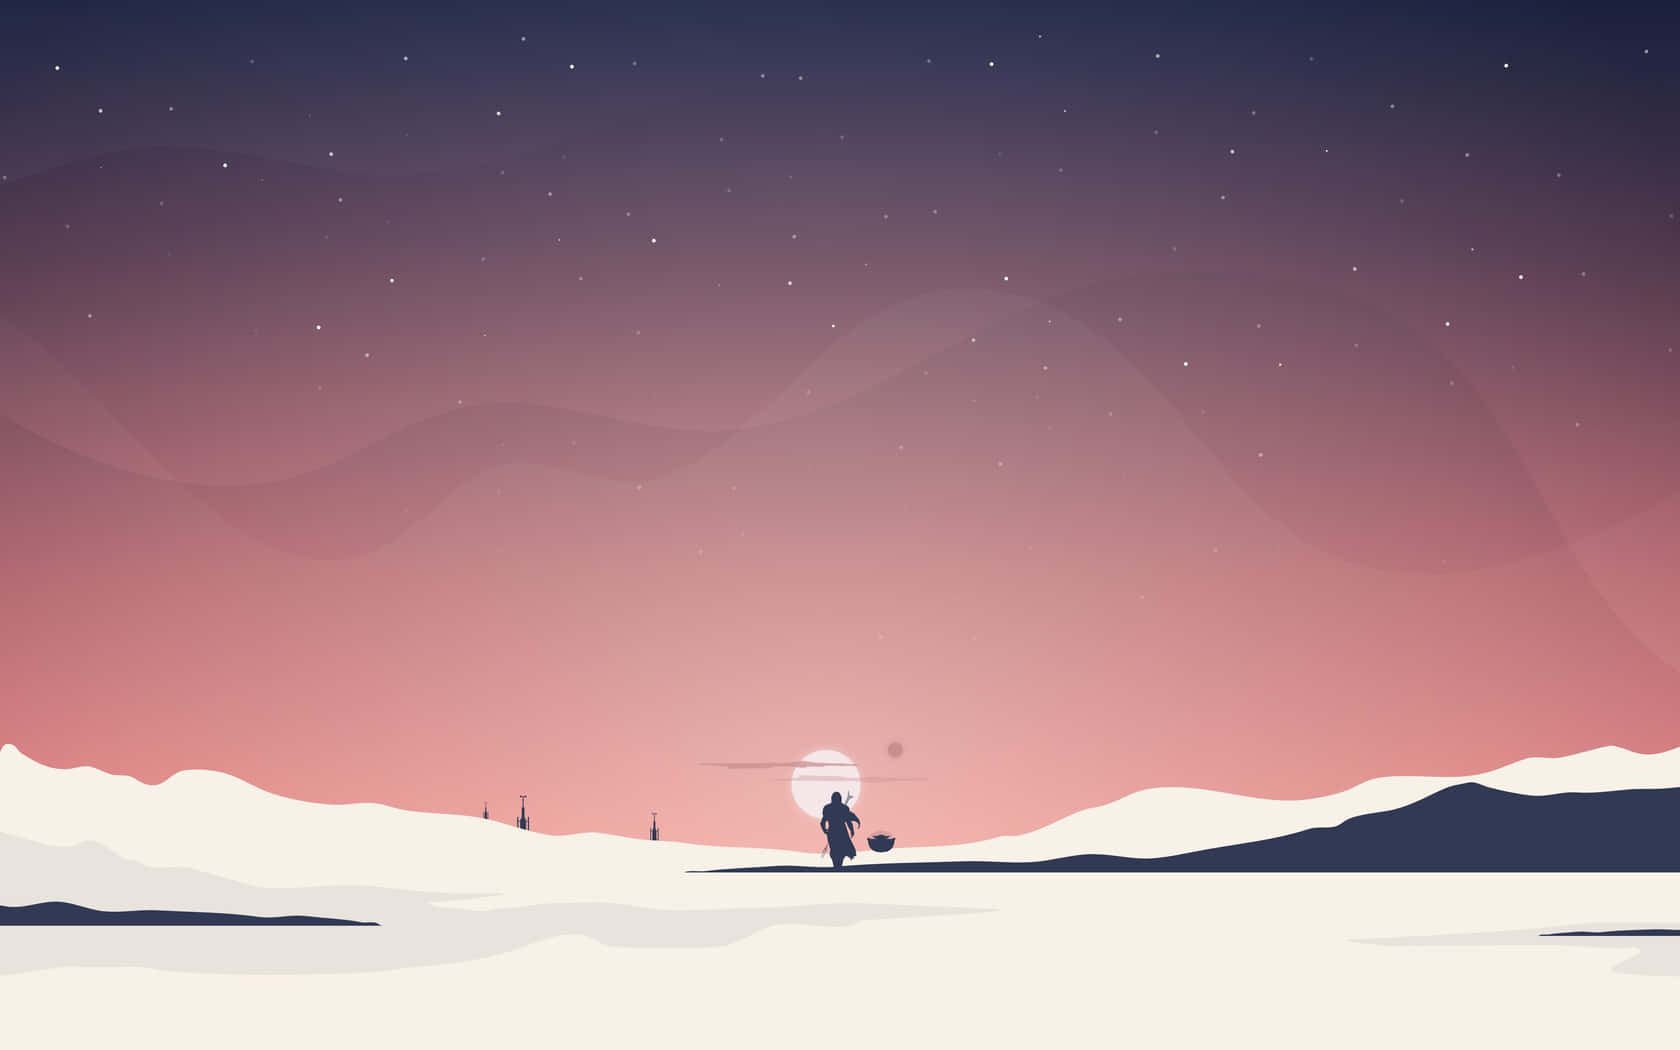 A Man Is Walking Across The Snowy Landscape With A Kite Wallpaper